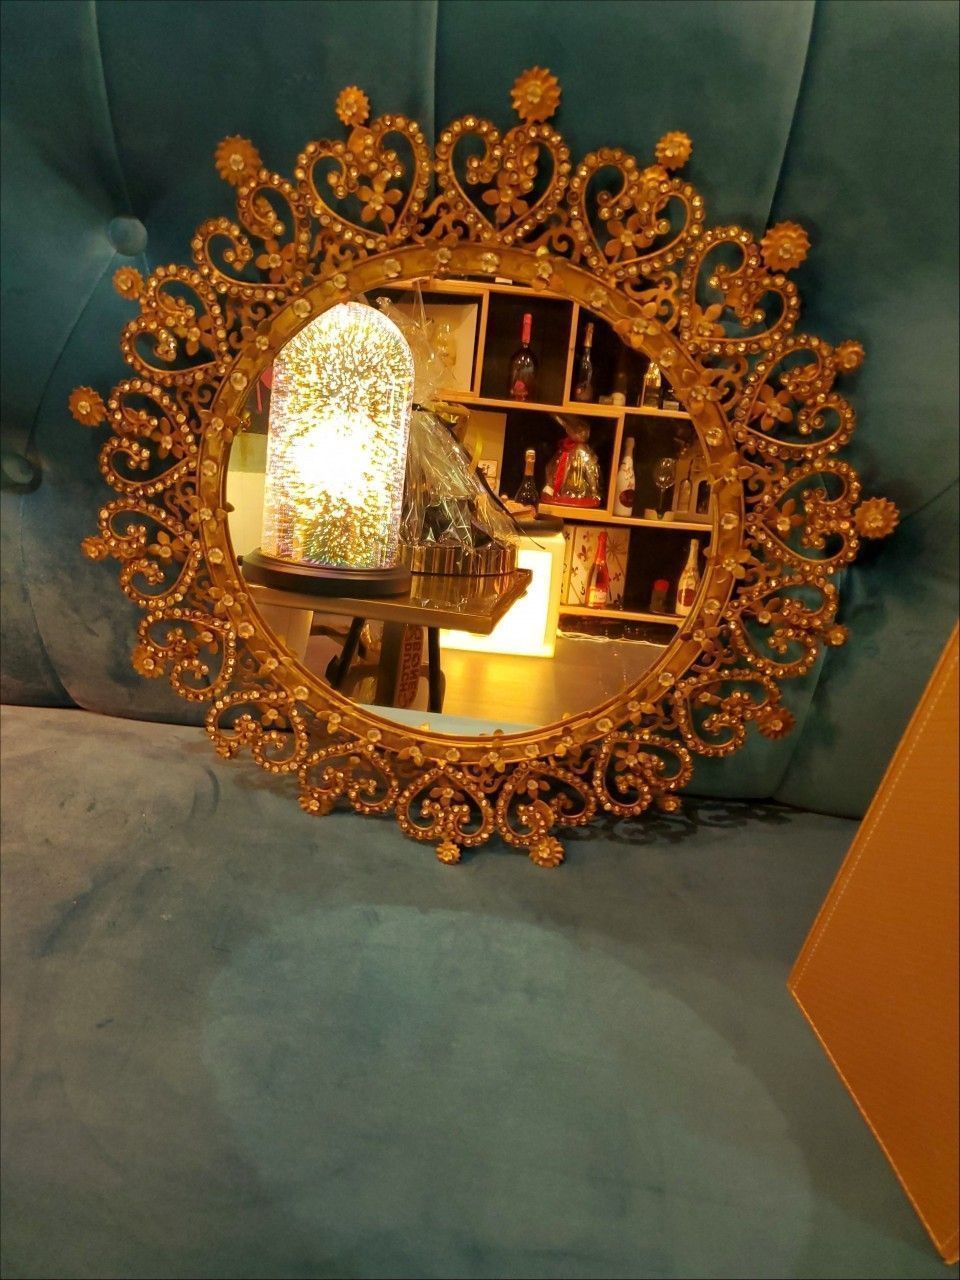 CHRYSOBULLE BY PRIE - CHAMPAGNE - Troyes : Miroir 